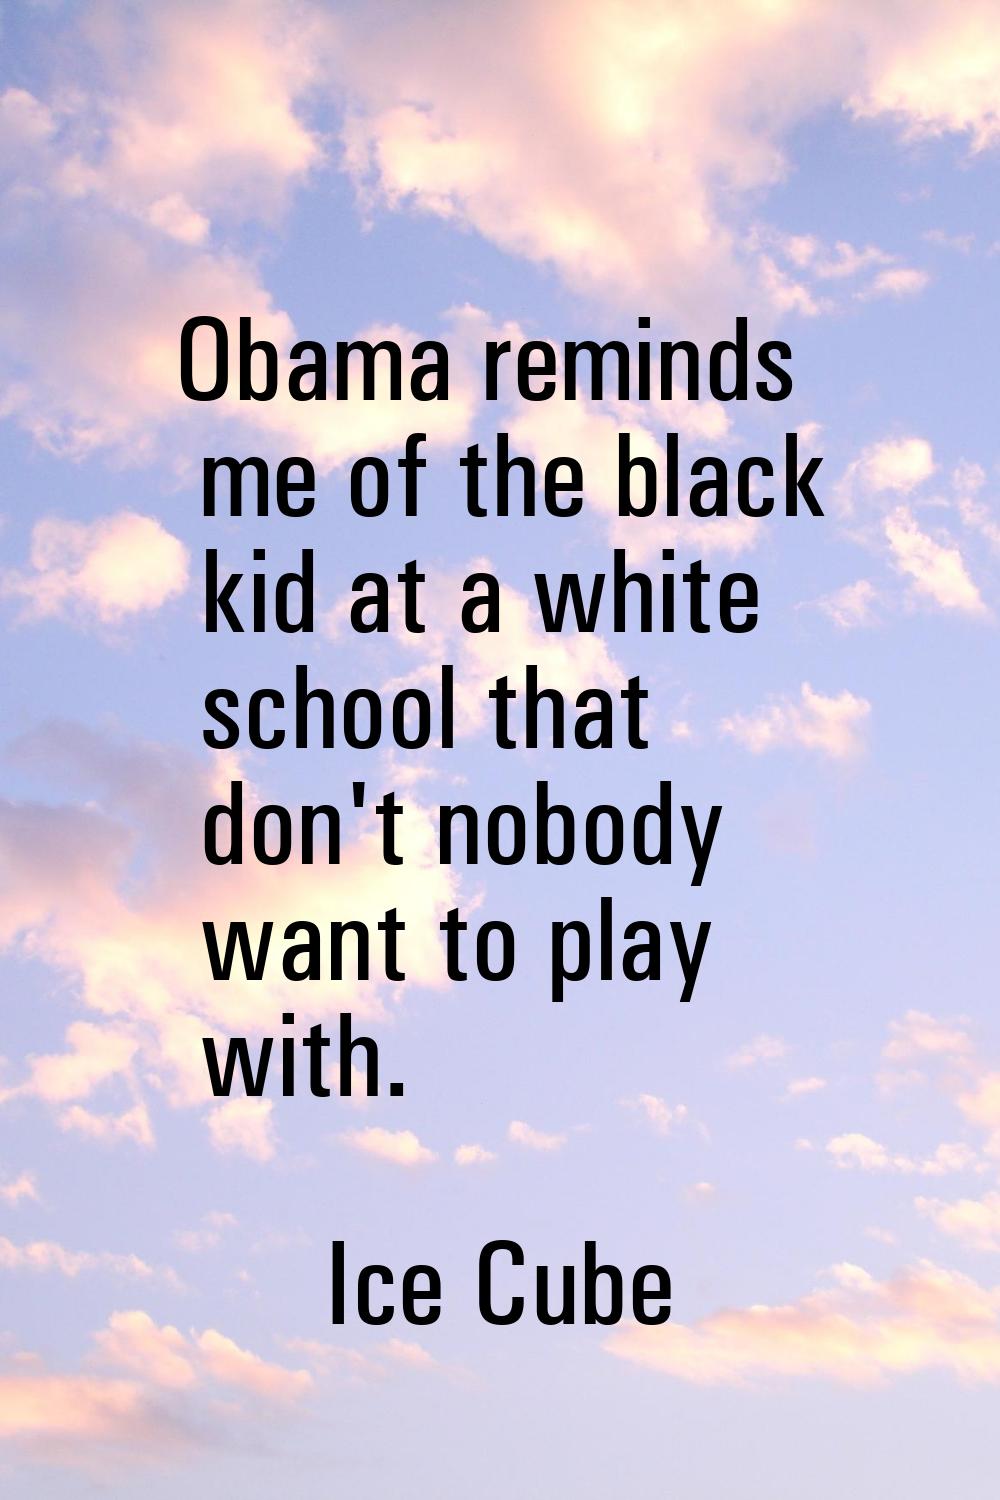 Obama reminds me of the black kid at a white school that don't nobody want to play with.